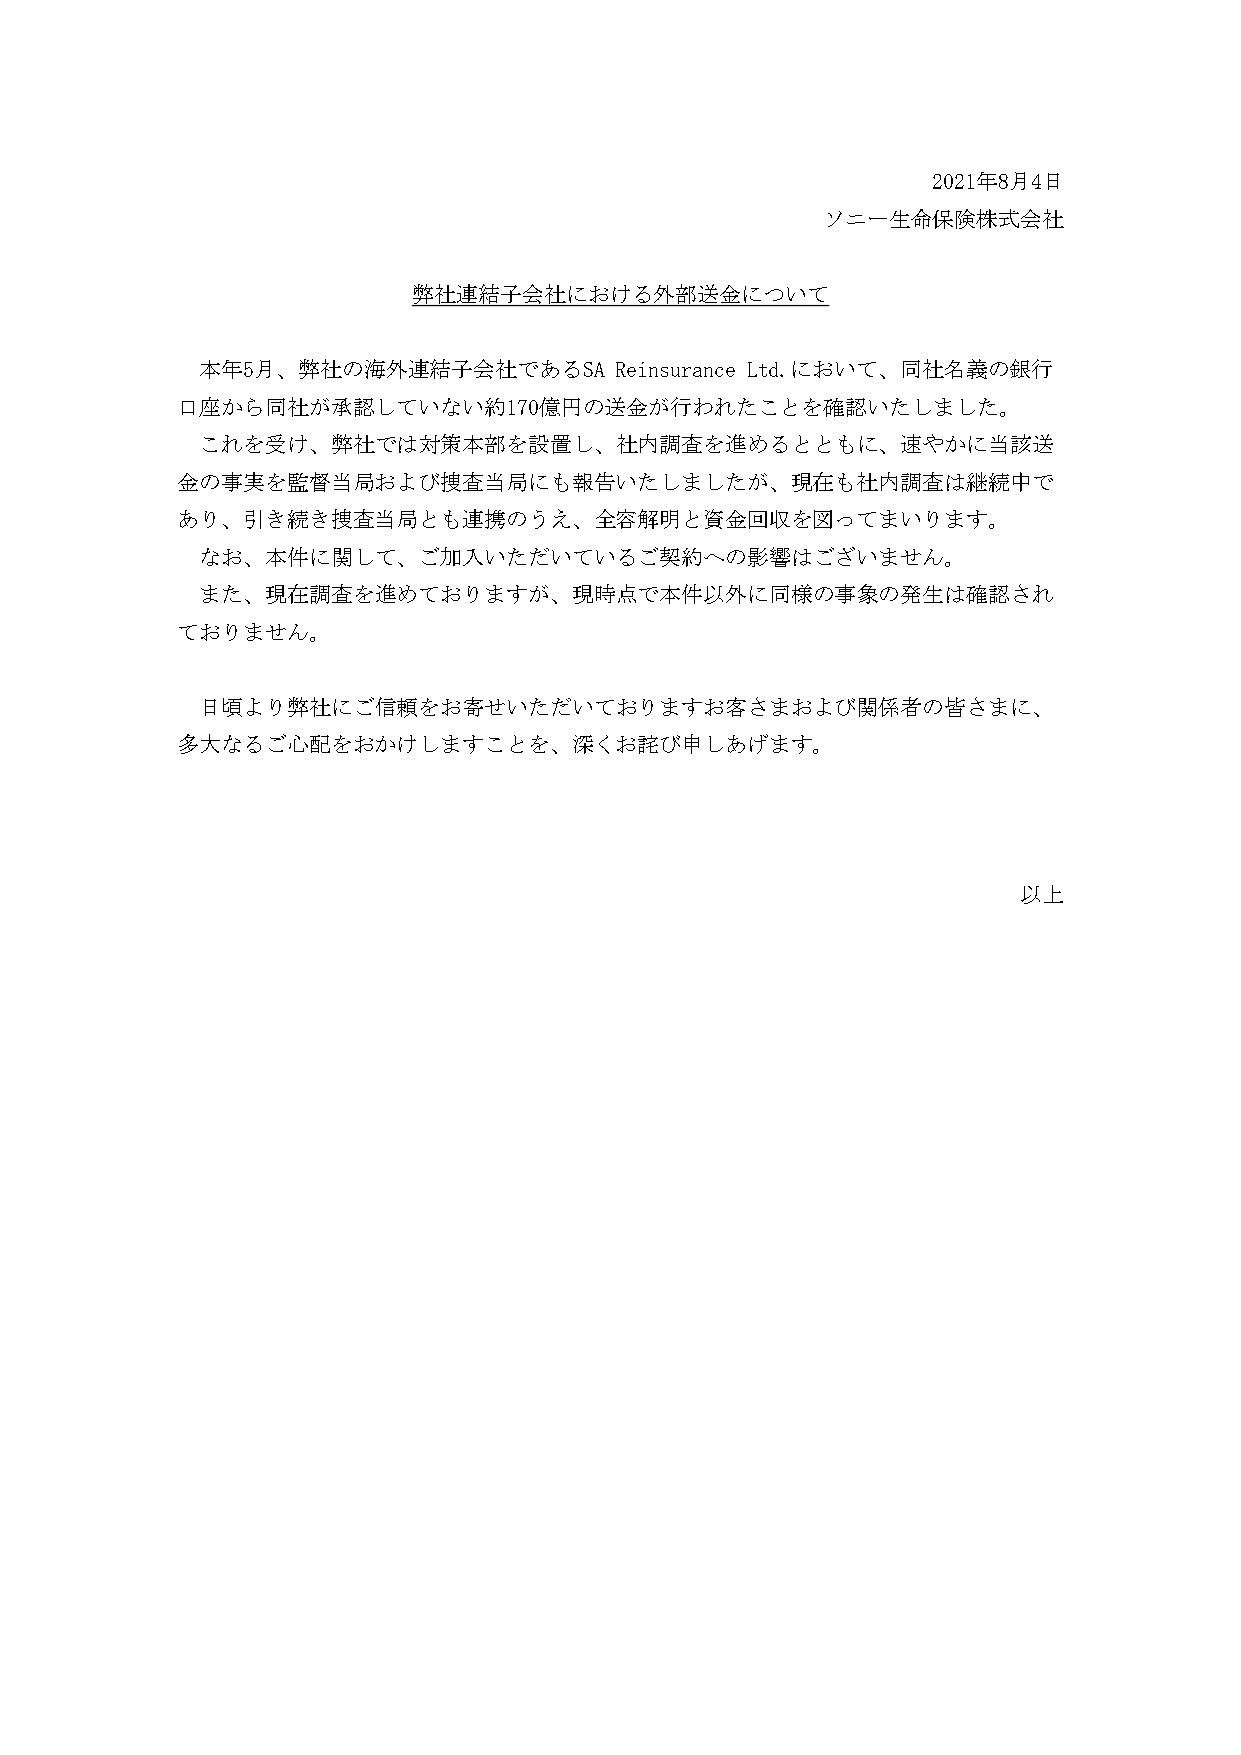 Unauthorized Transfer Of 17 Billion Yen To Sony Life S Overseas Subsidiary No Effect On Subscribers Itmedia